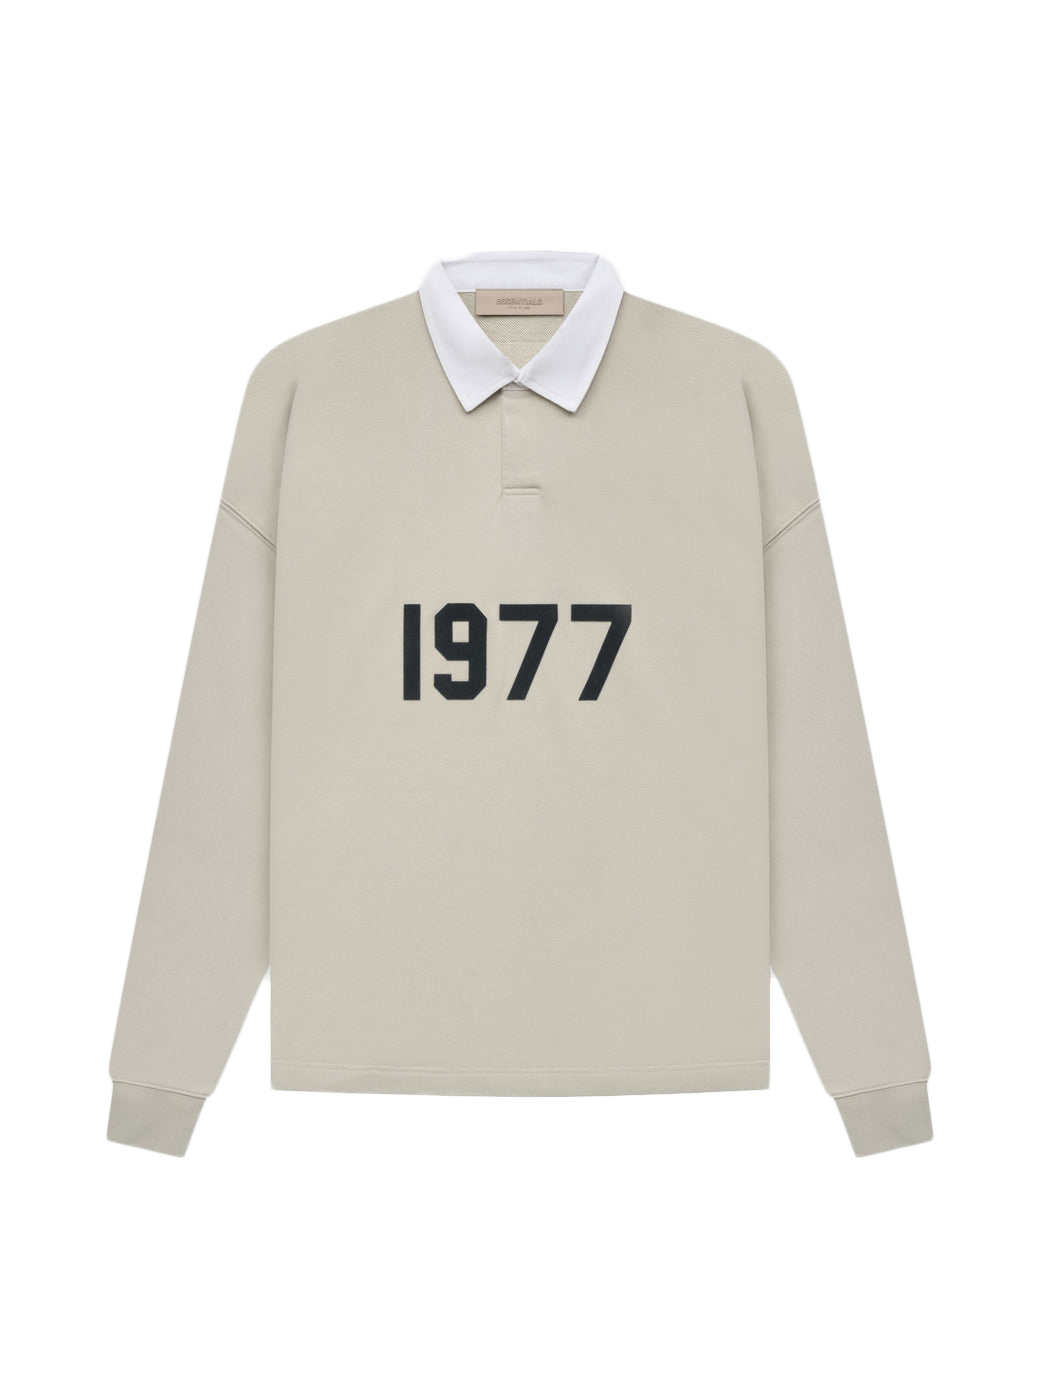 Fear of God Essentials 1977 Rugby Iron Men's - SS22 - US